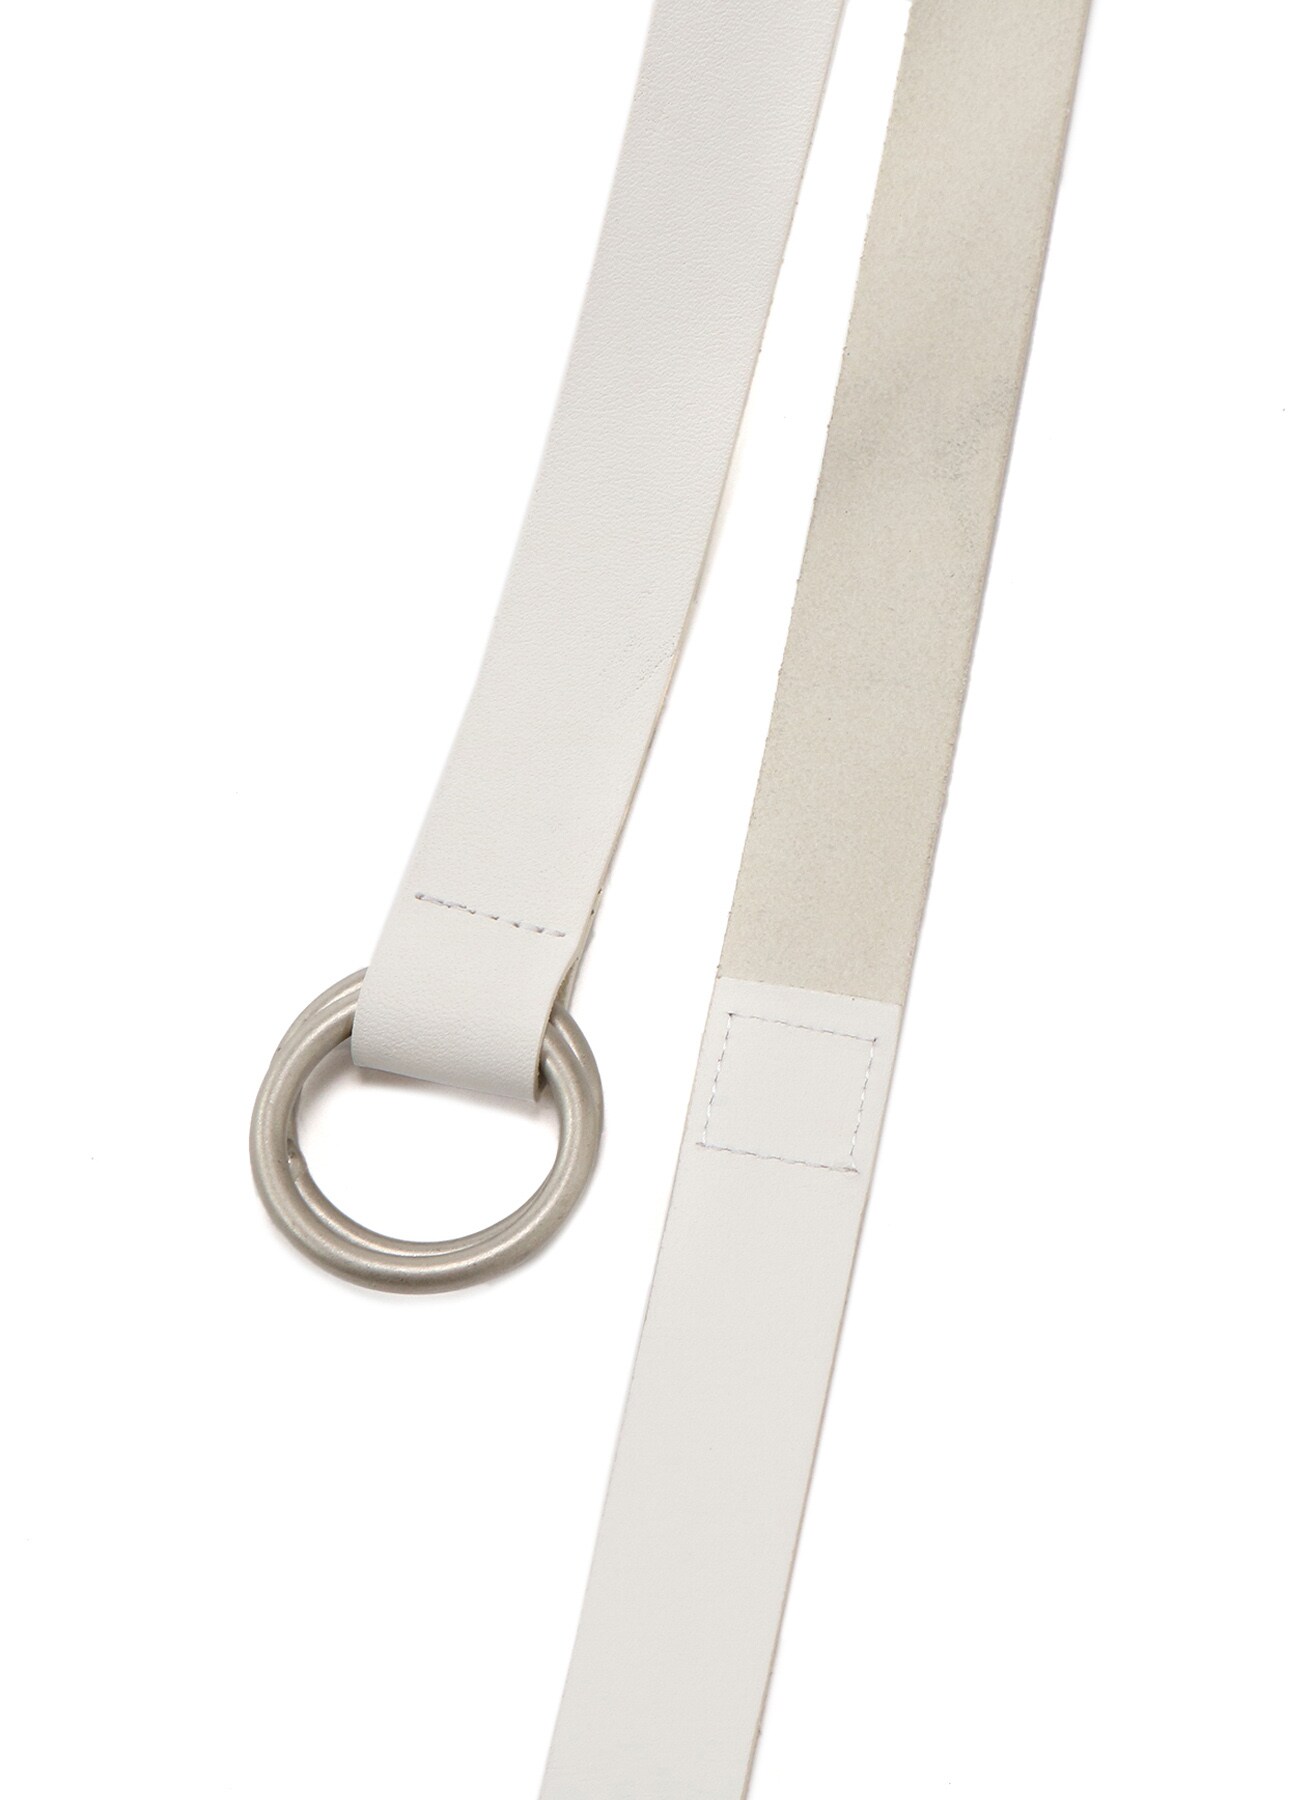 Cow Leather 25mm Long Ring Belt